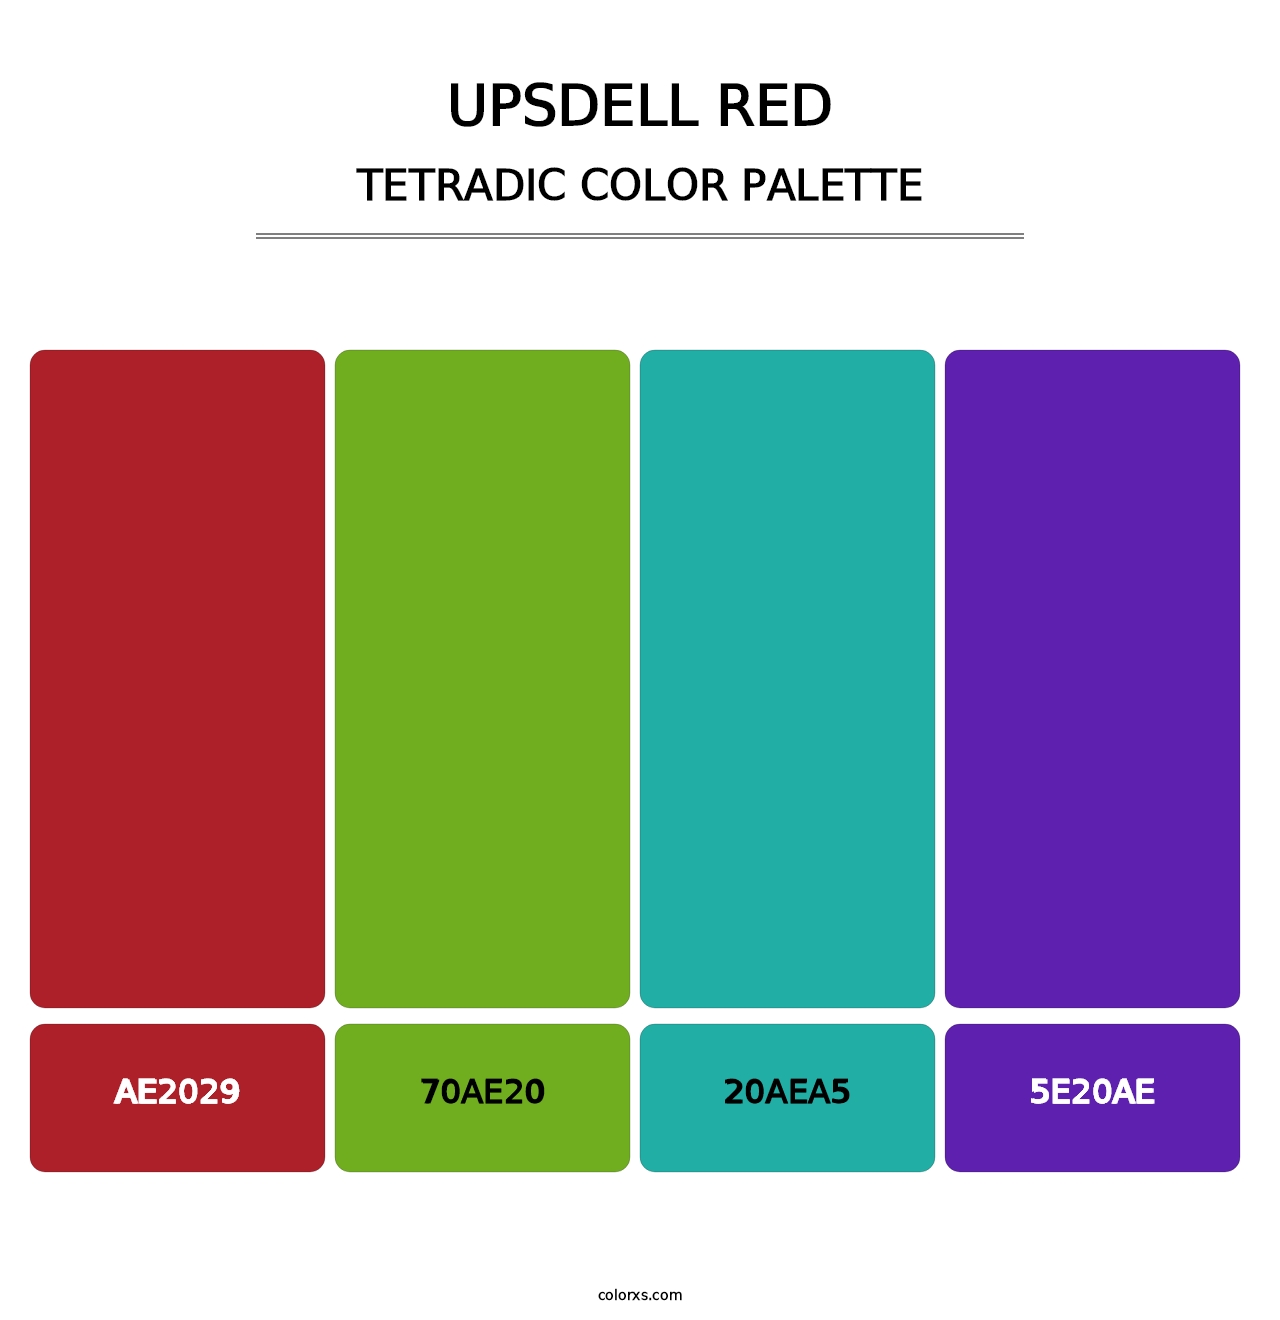 Upsdell Red - Tetradic Color Palette